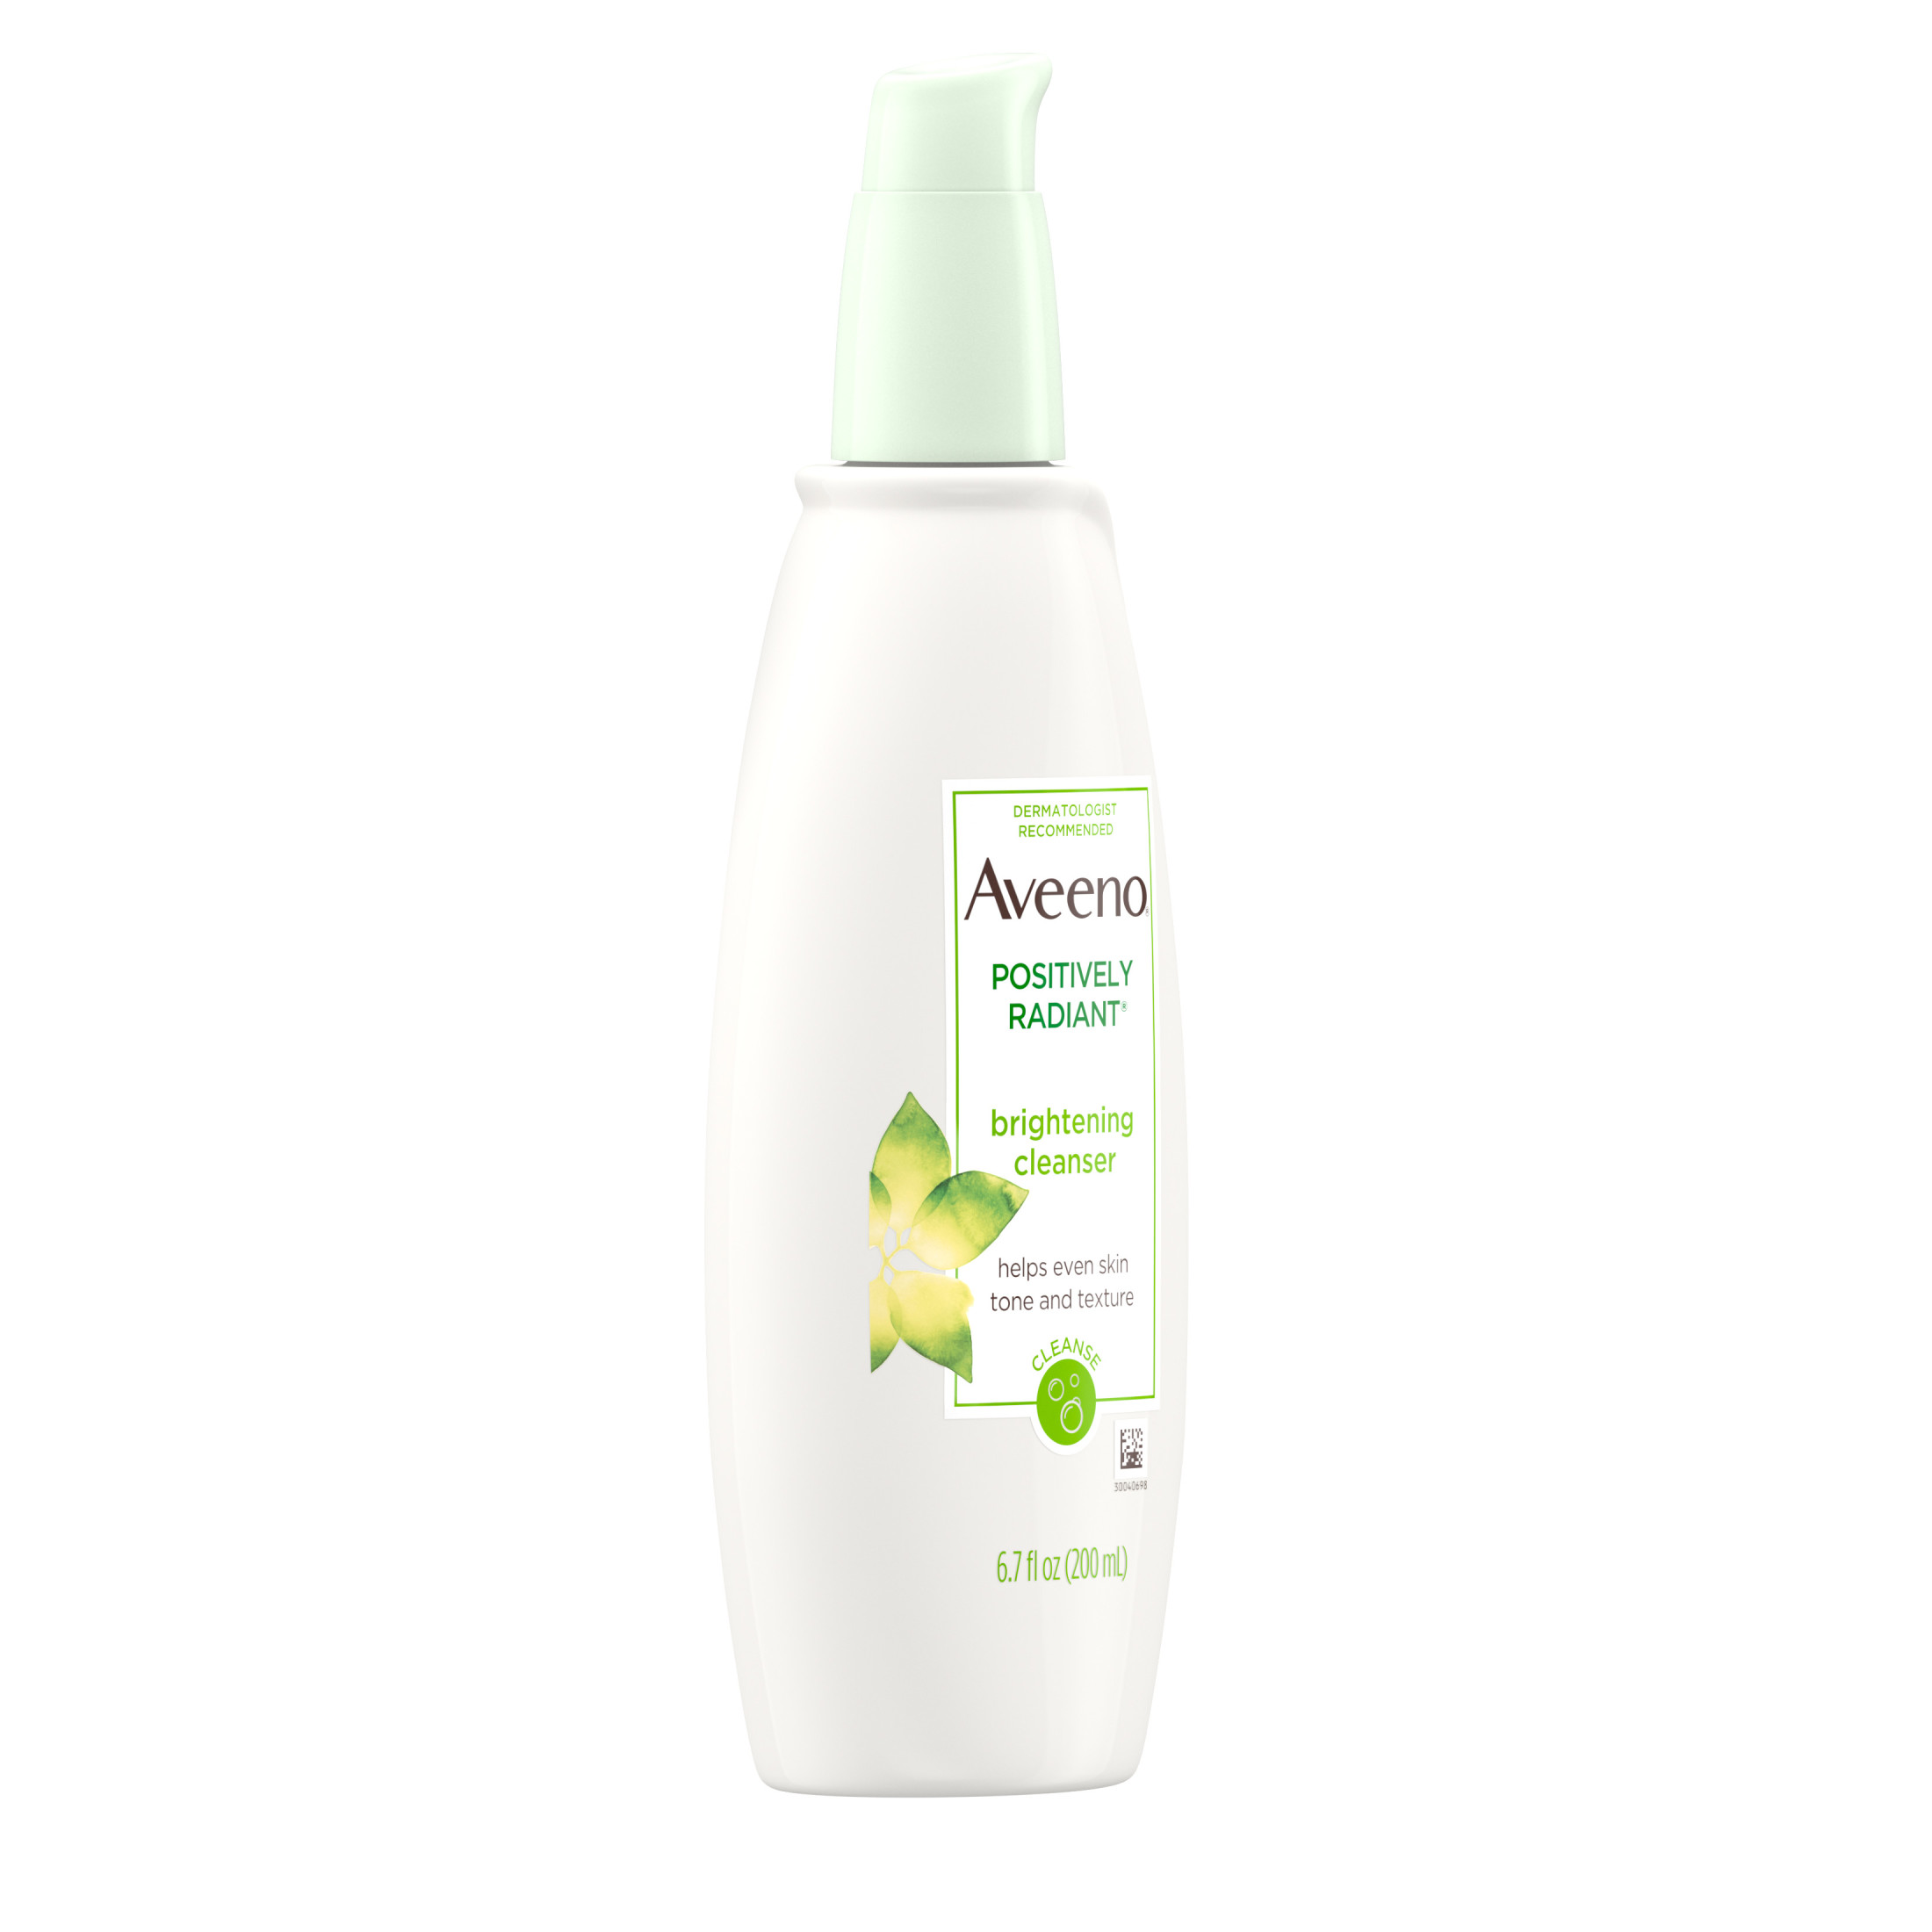 Aveeno Positively Radiant Brightening Facial Cleanser, 6.7 fl. oz - image 3 of 6